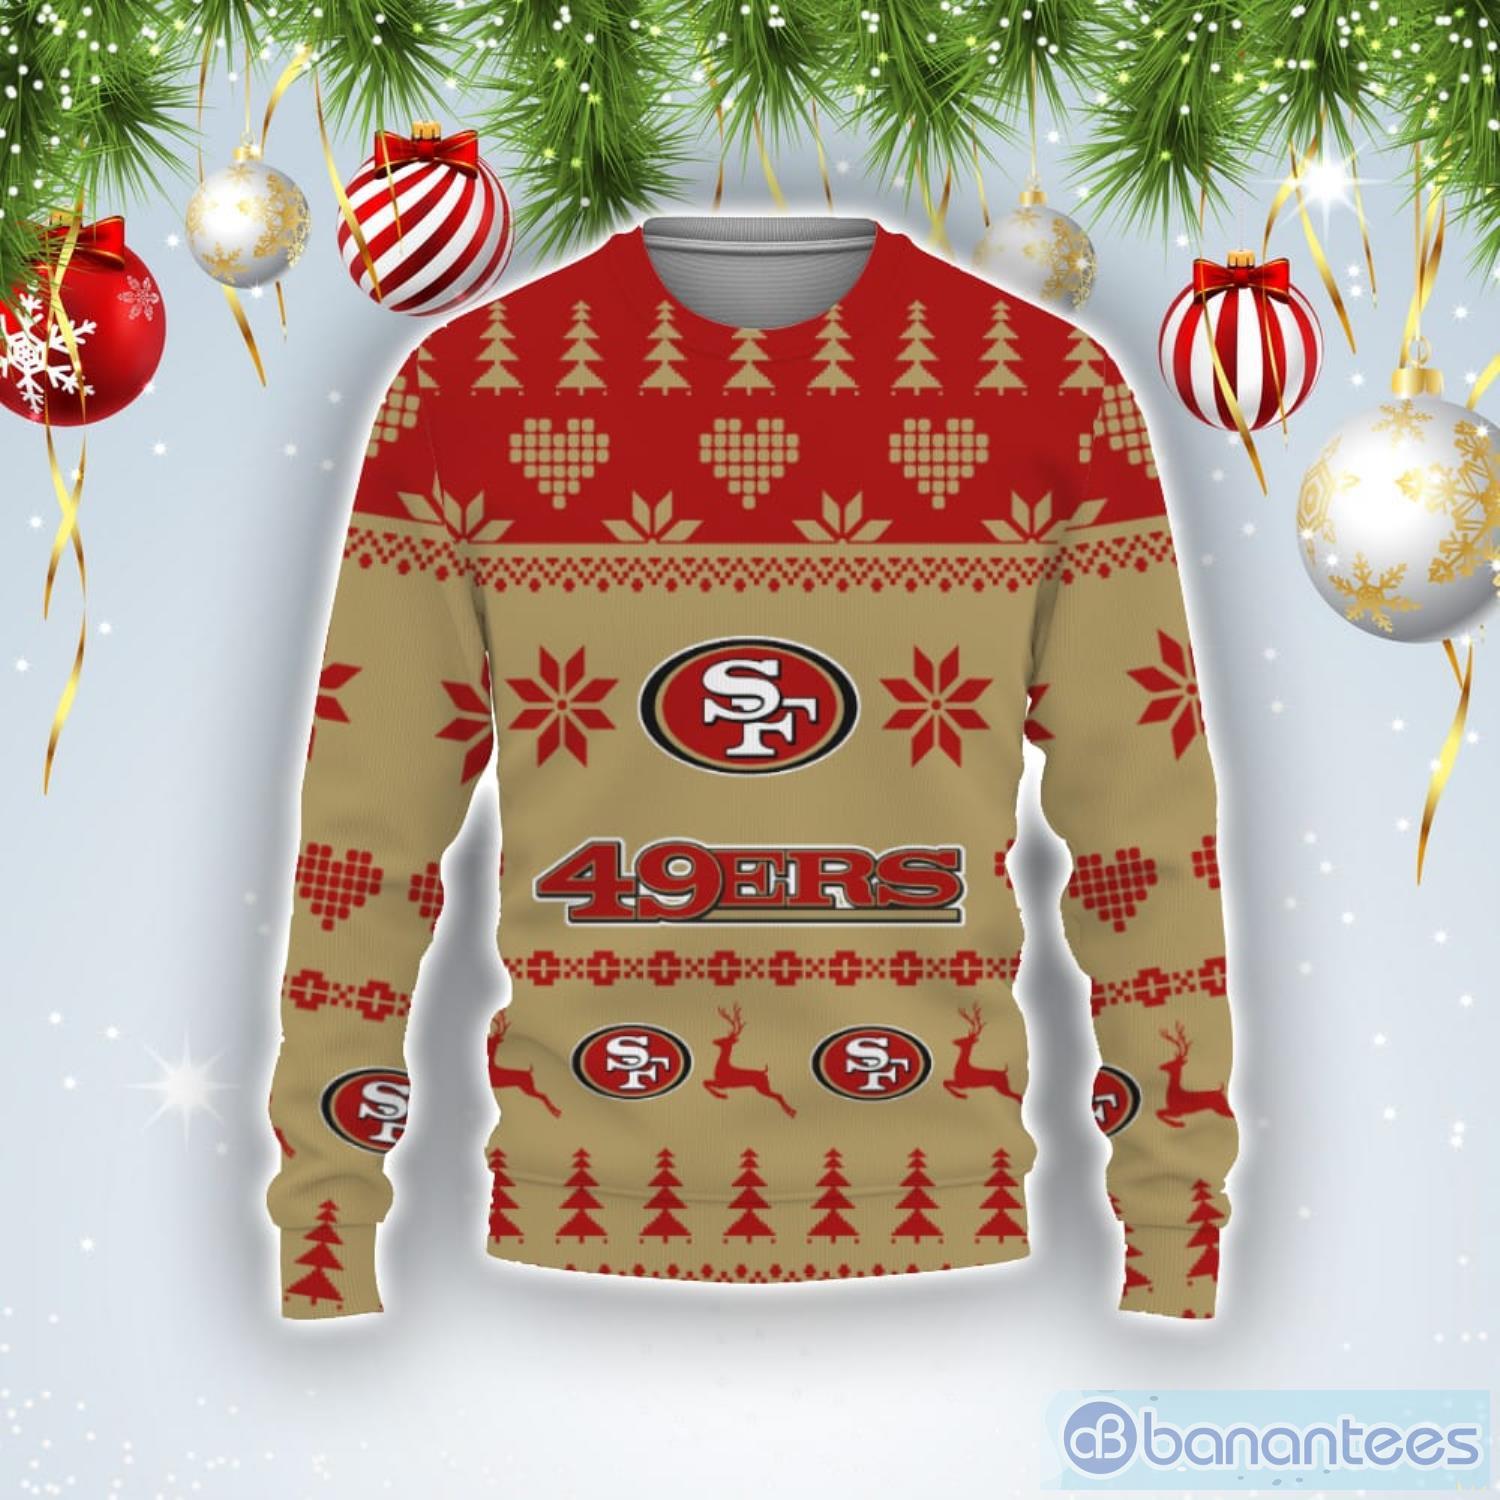 49er ugly sweater